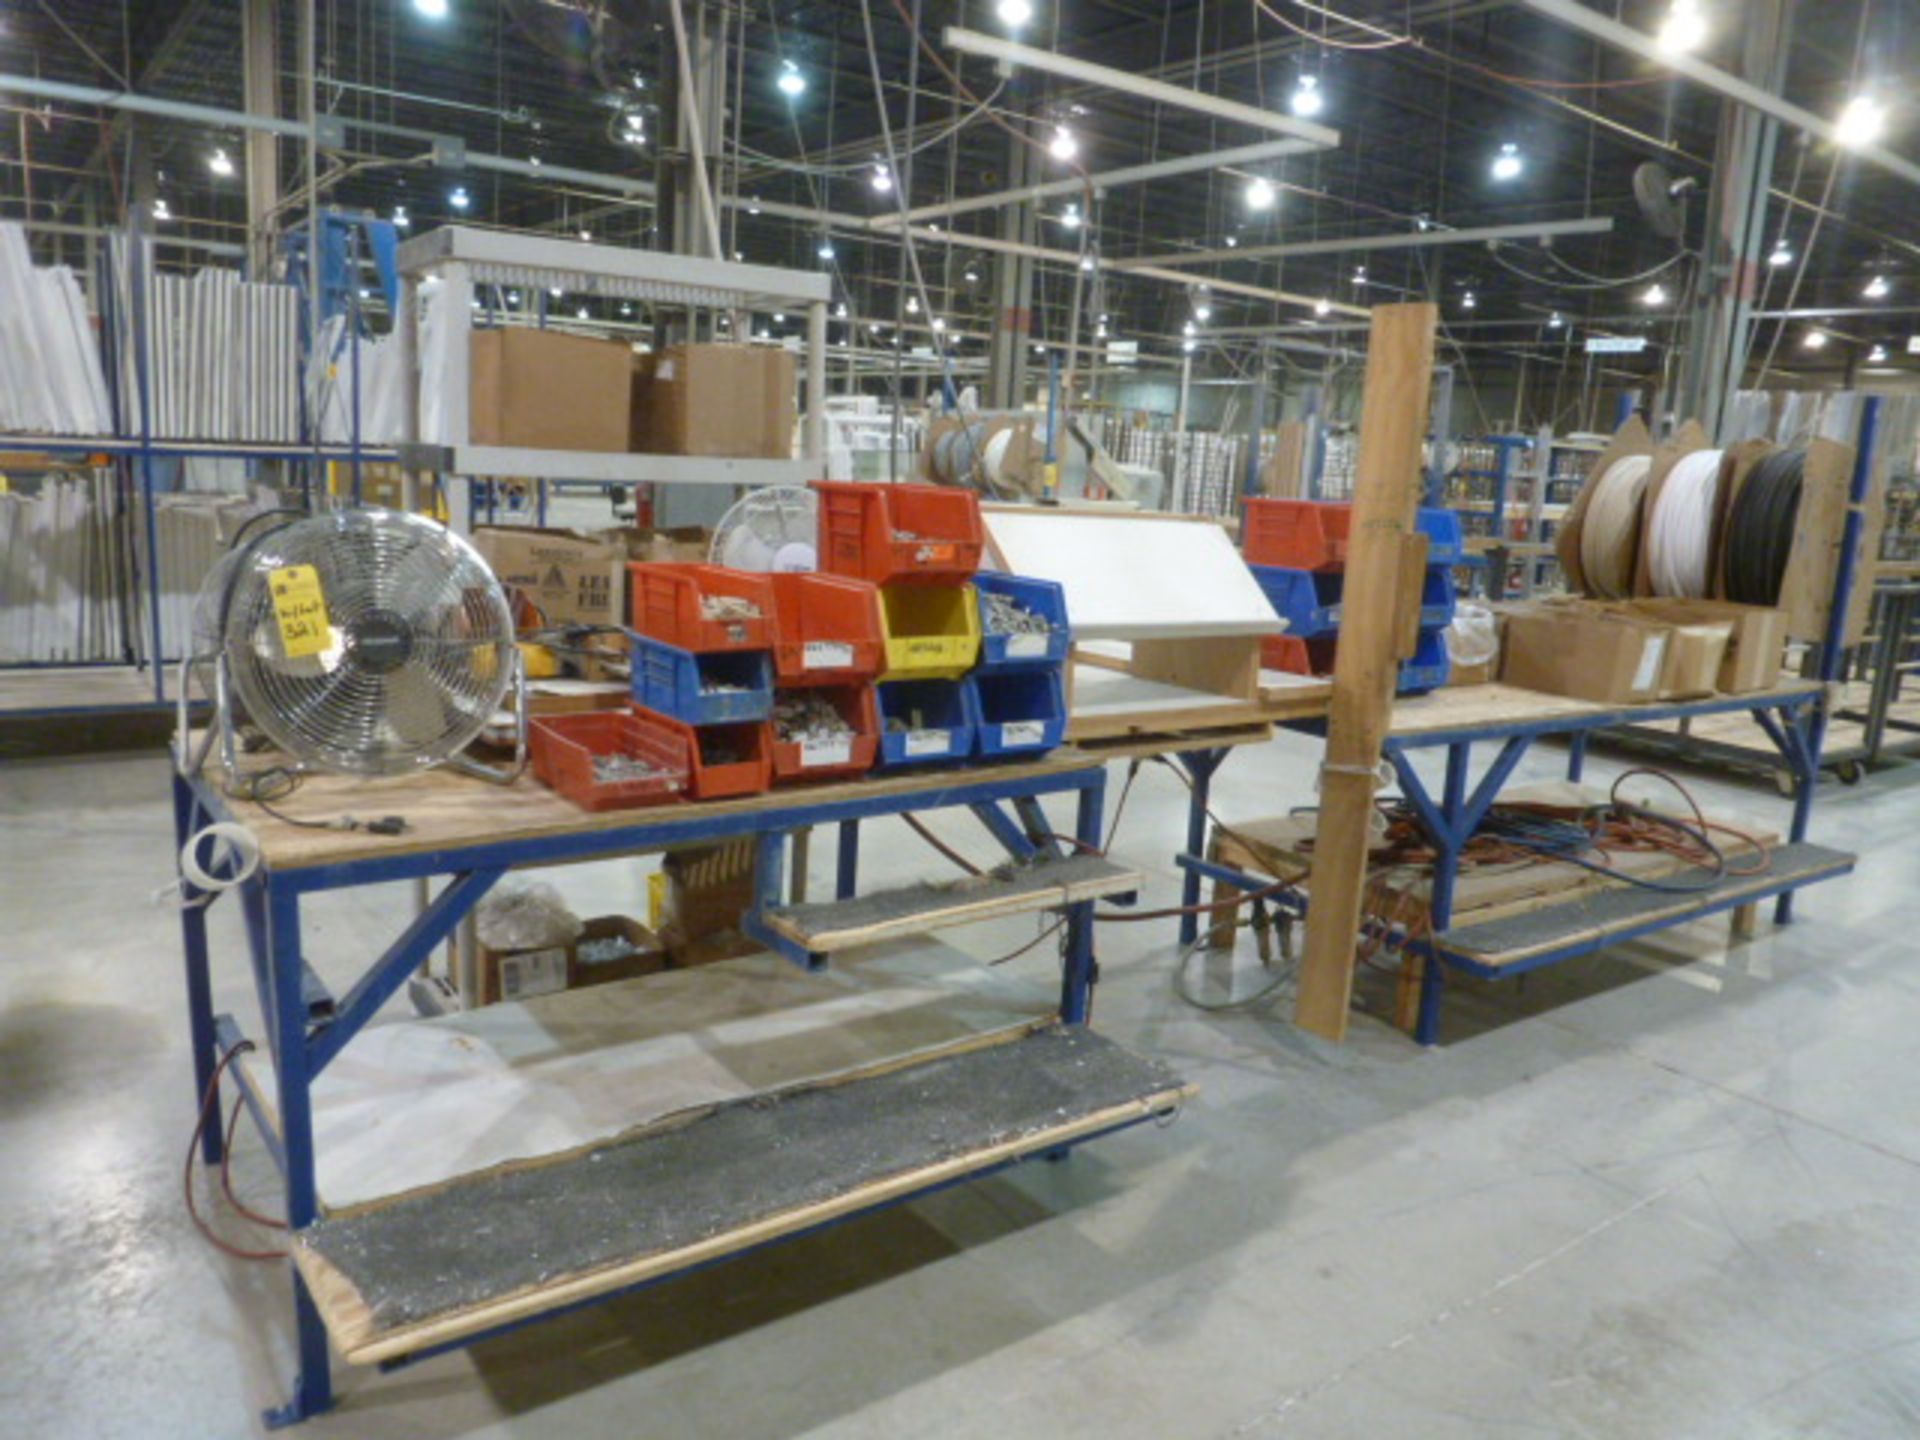 Window Parts, Draft Tables, Ultra Loc, Electric Routers, Installation Work Tables, Etc. (Lot) - Image 3 of 7